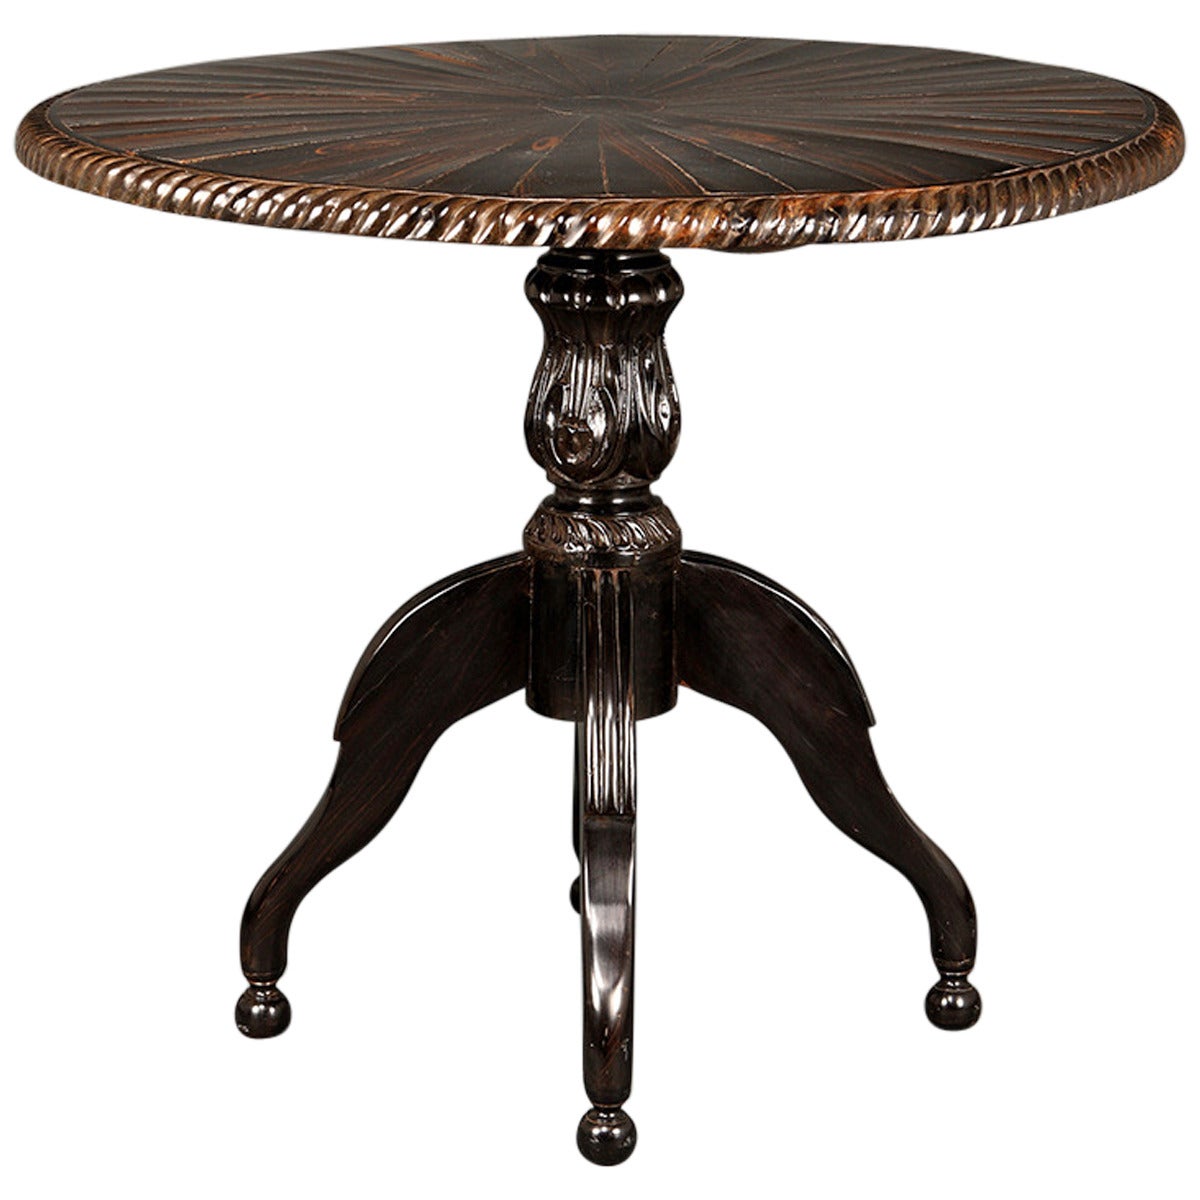 Calamander Ebony Round Table For Sale